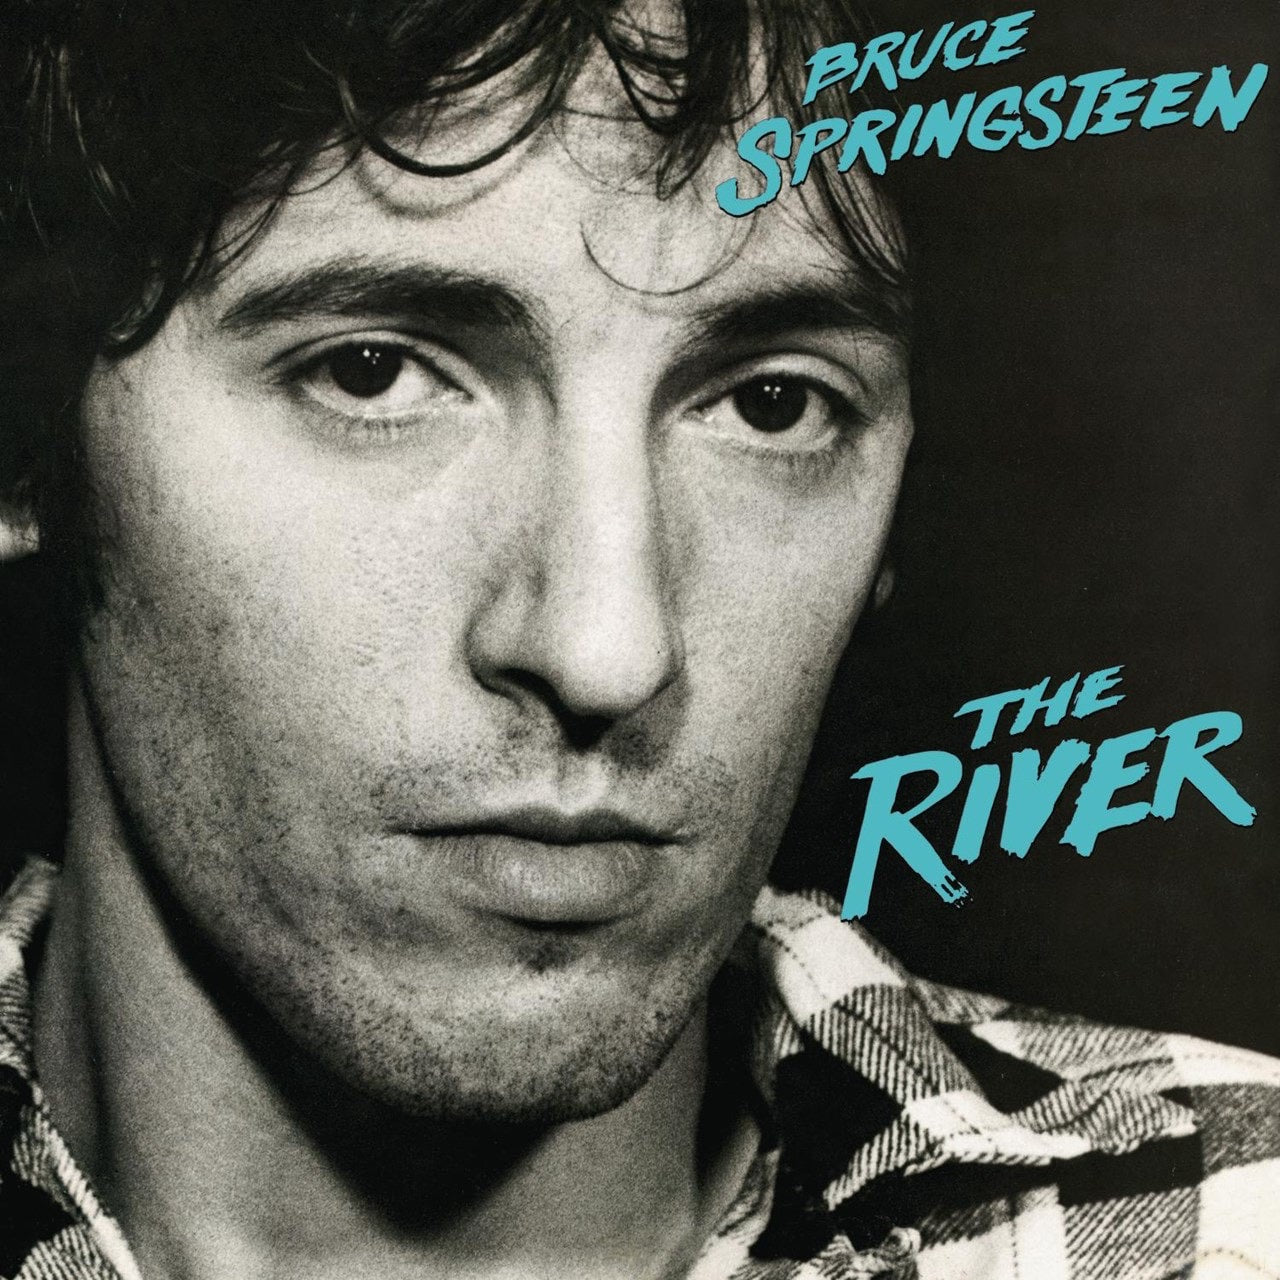 Bruce Springsteen - The River (2LP)